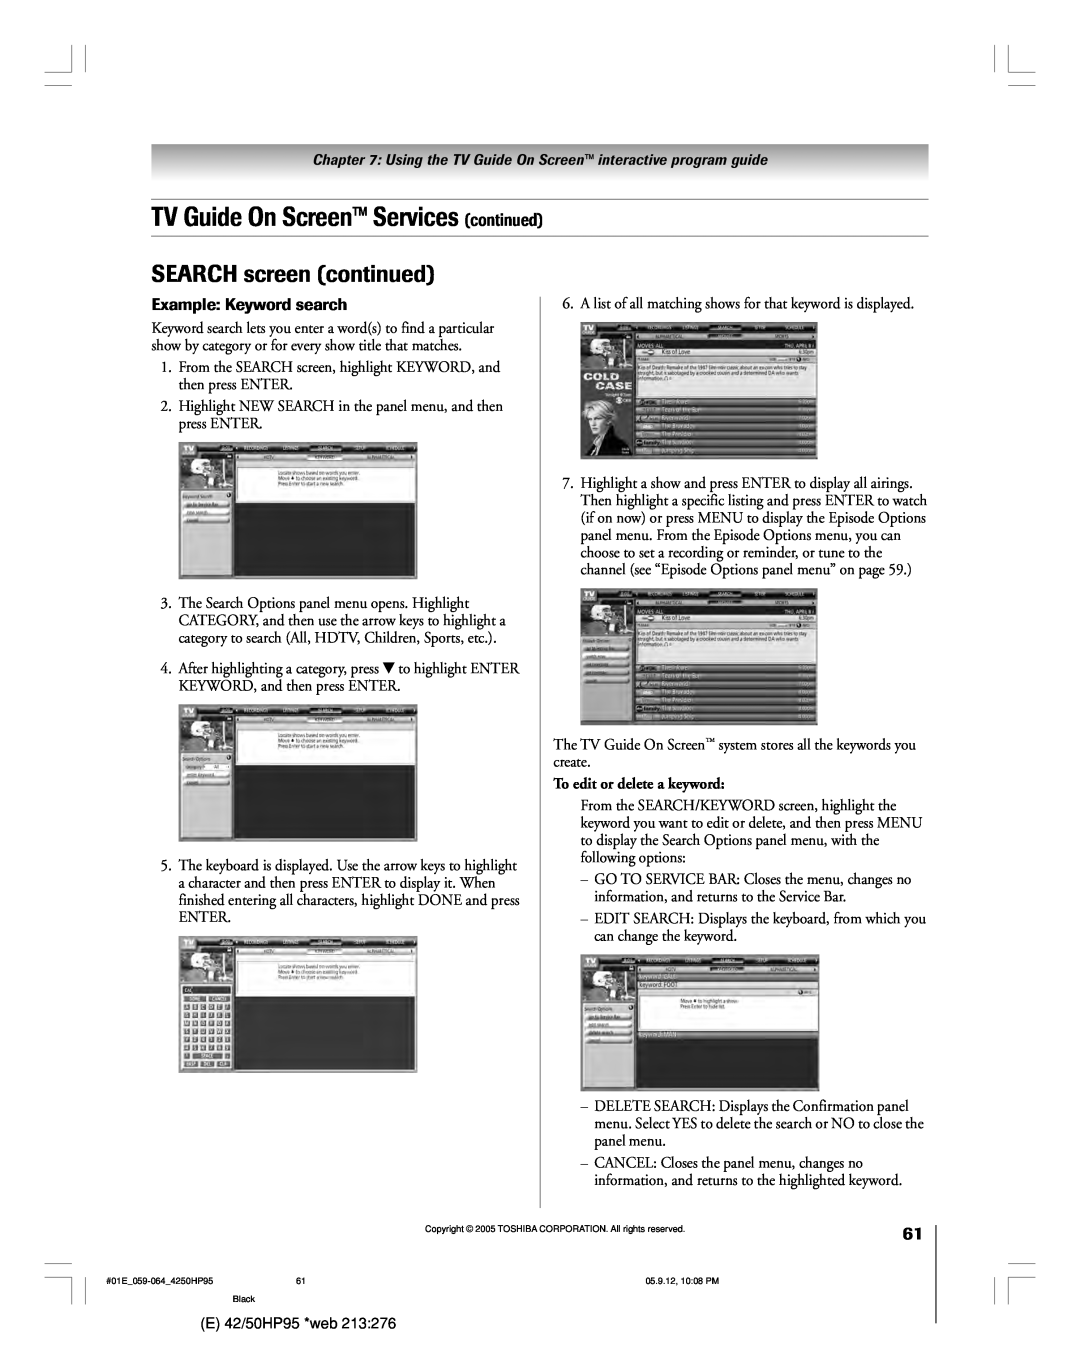 Toshiba 42HP95 owner manual SEARCH screen continued, Example Keyword search, To edit or delete a keyword 